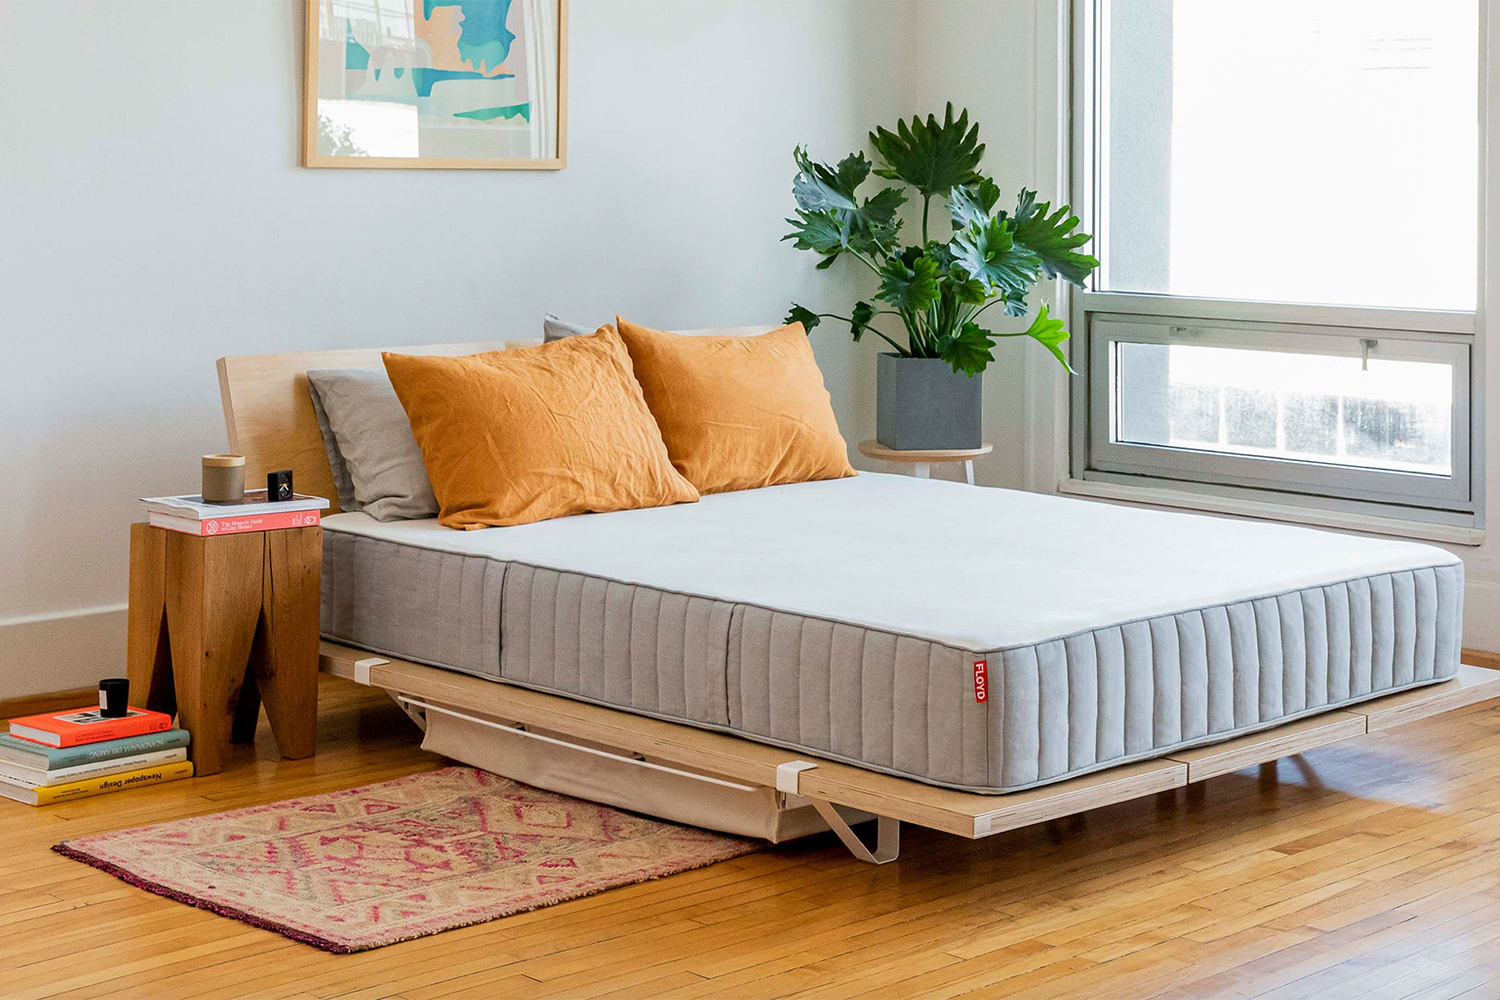 a mattress on a nice wooden frame in a minimal room